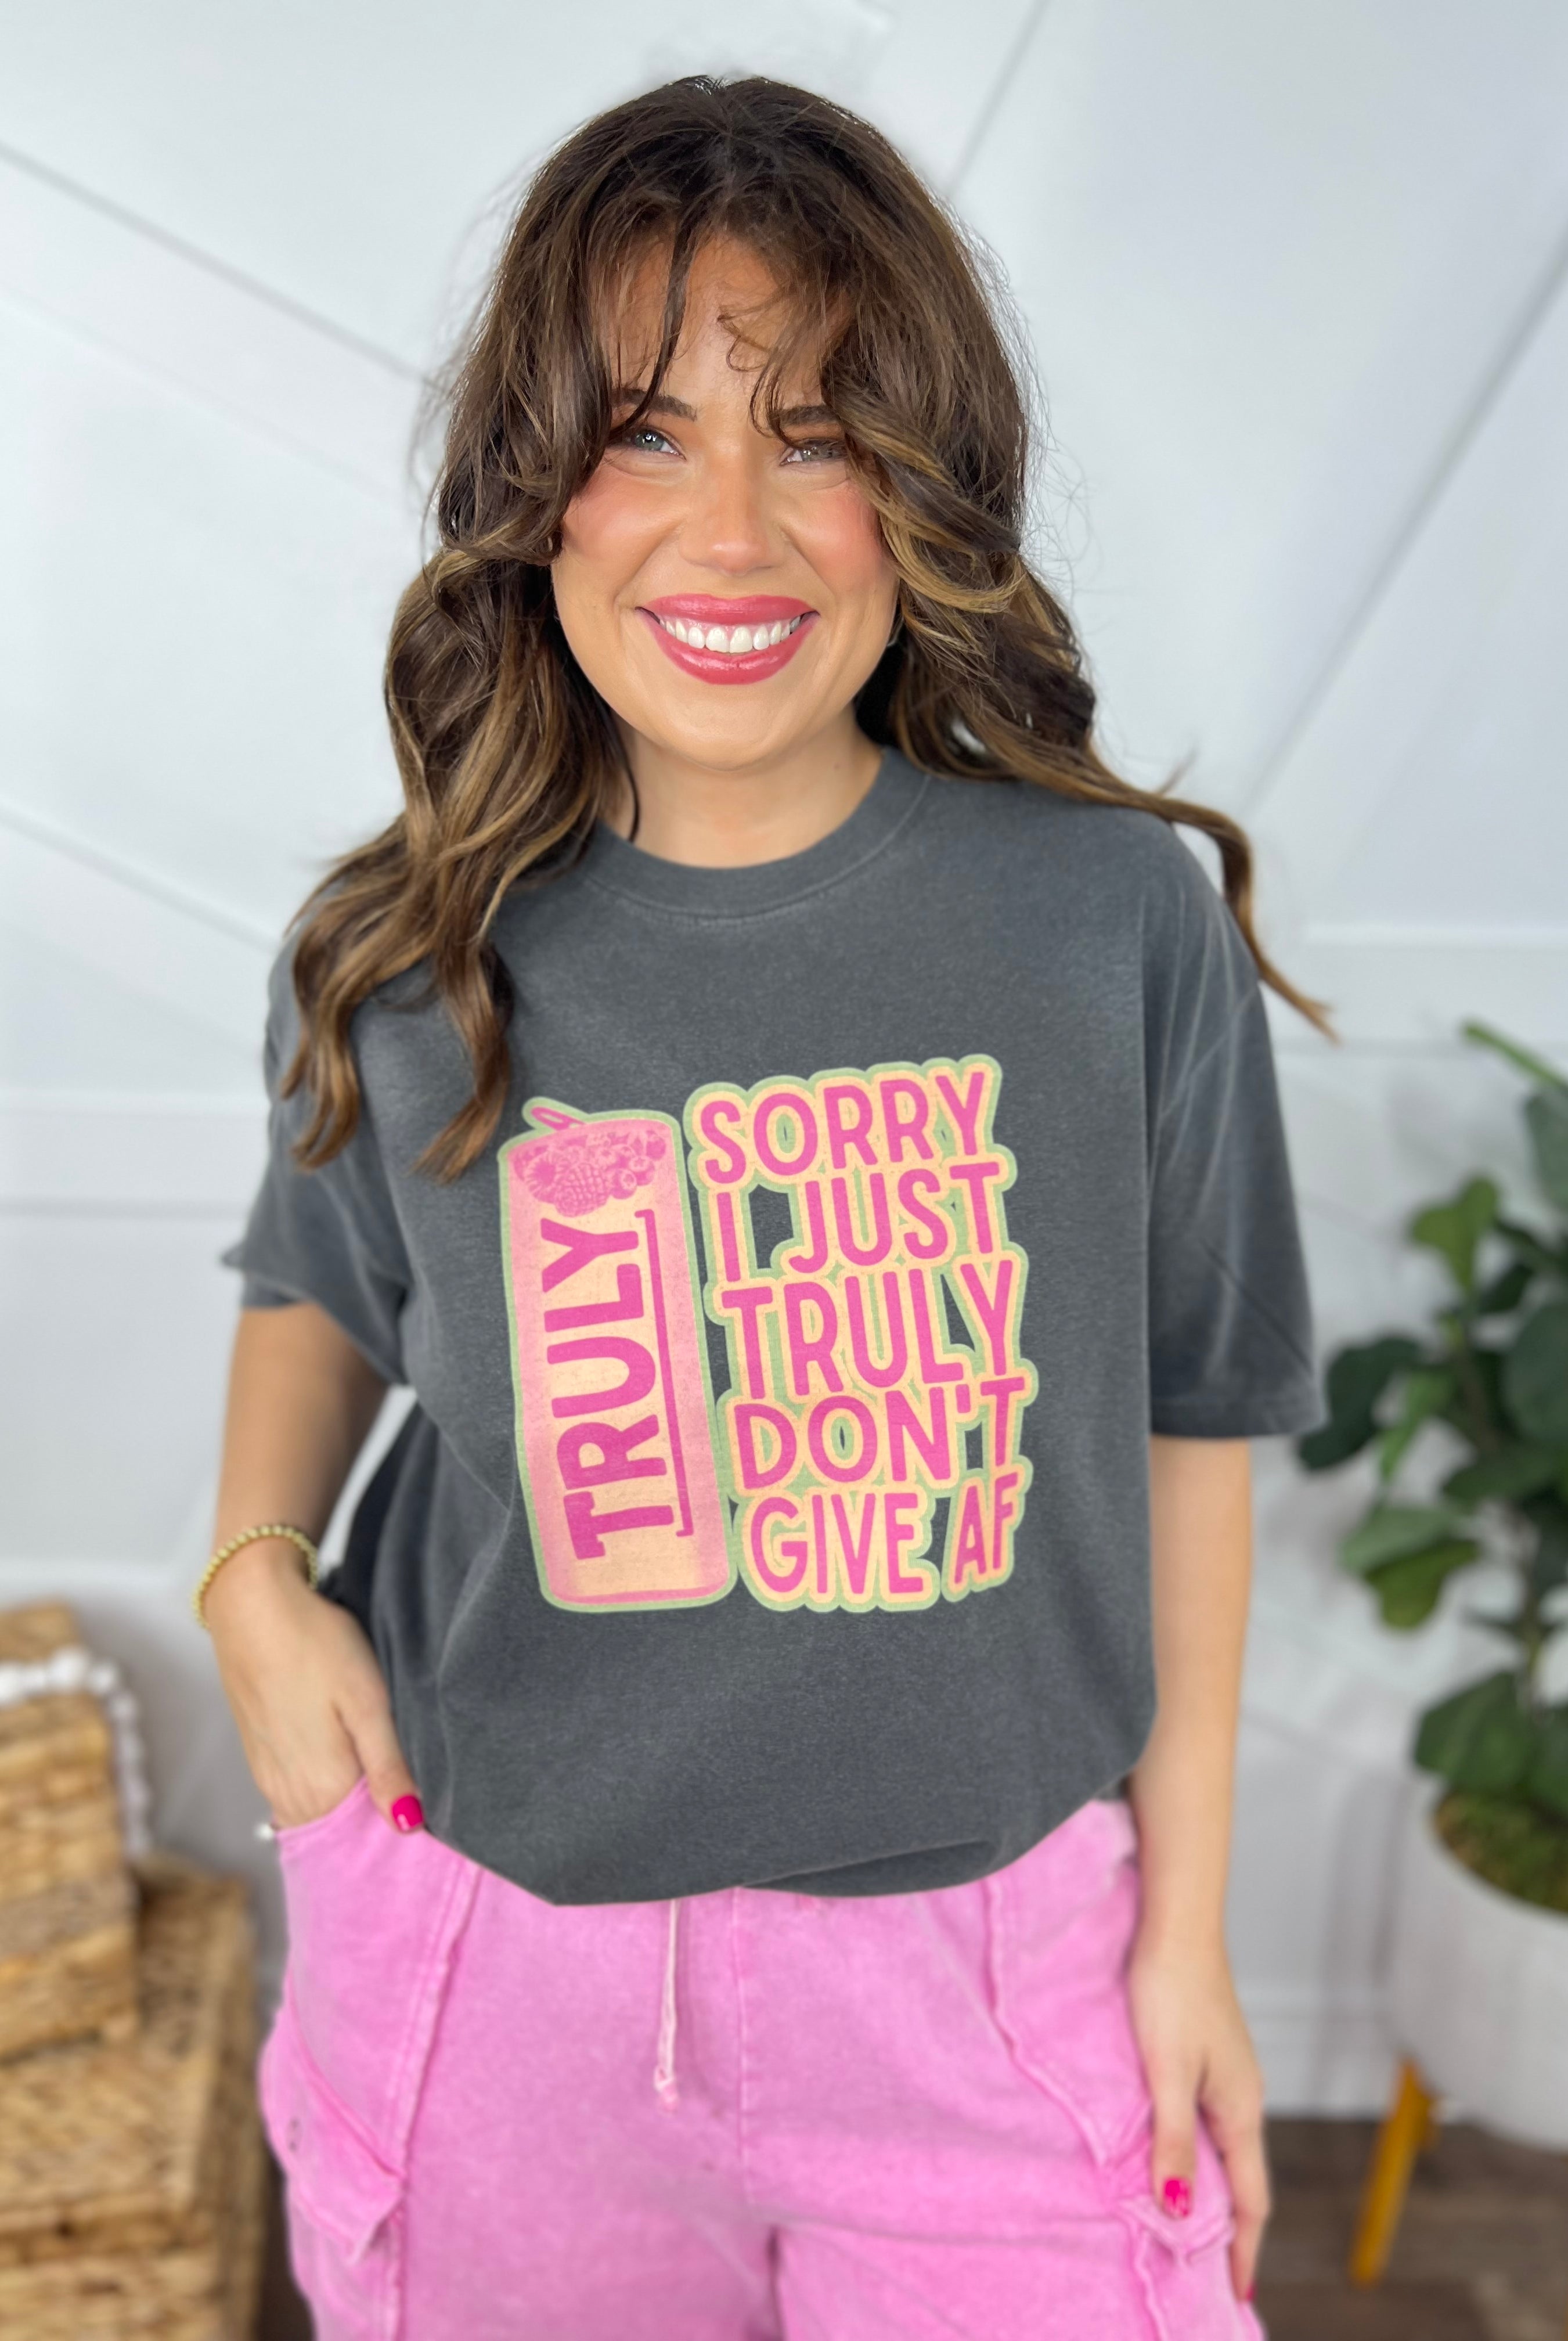 Truely Don't Graphic Tee-130 Graphic Tees-Heathered Boho-Heathered Boho Boutique, Women's Fashion and Accessories in Palmetto, FL